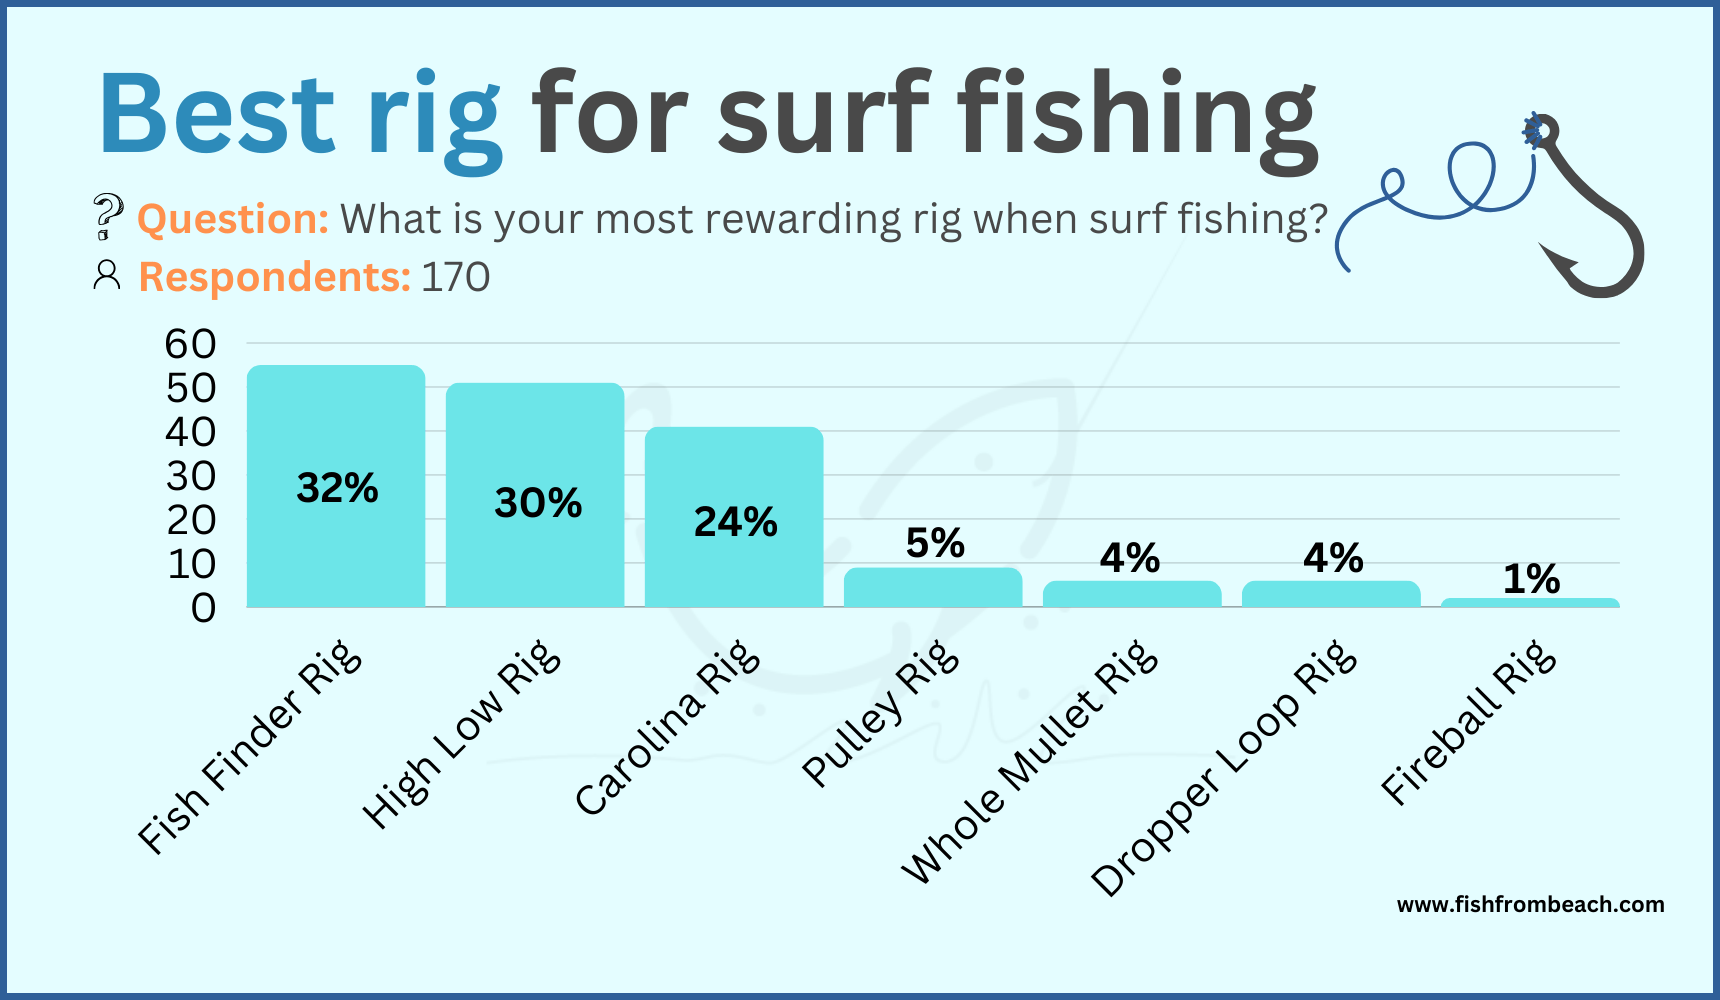 What is the favorite surf rig?